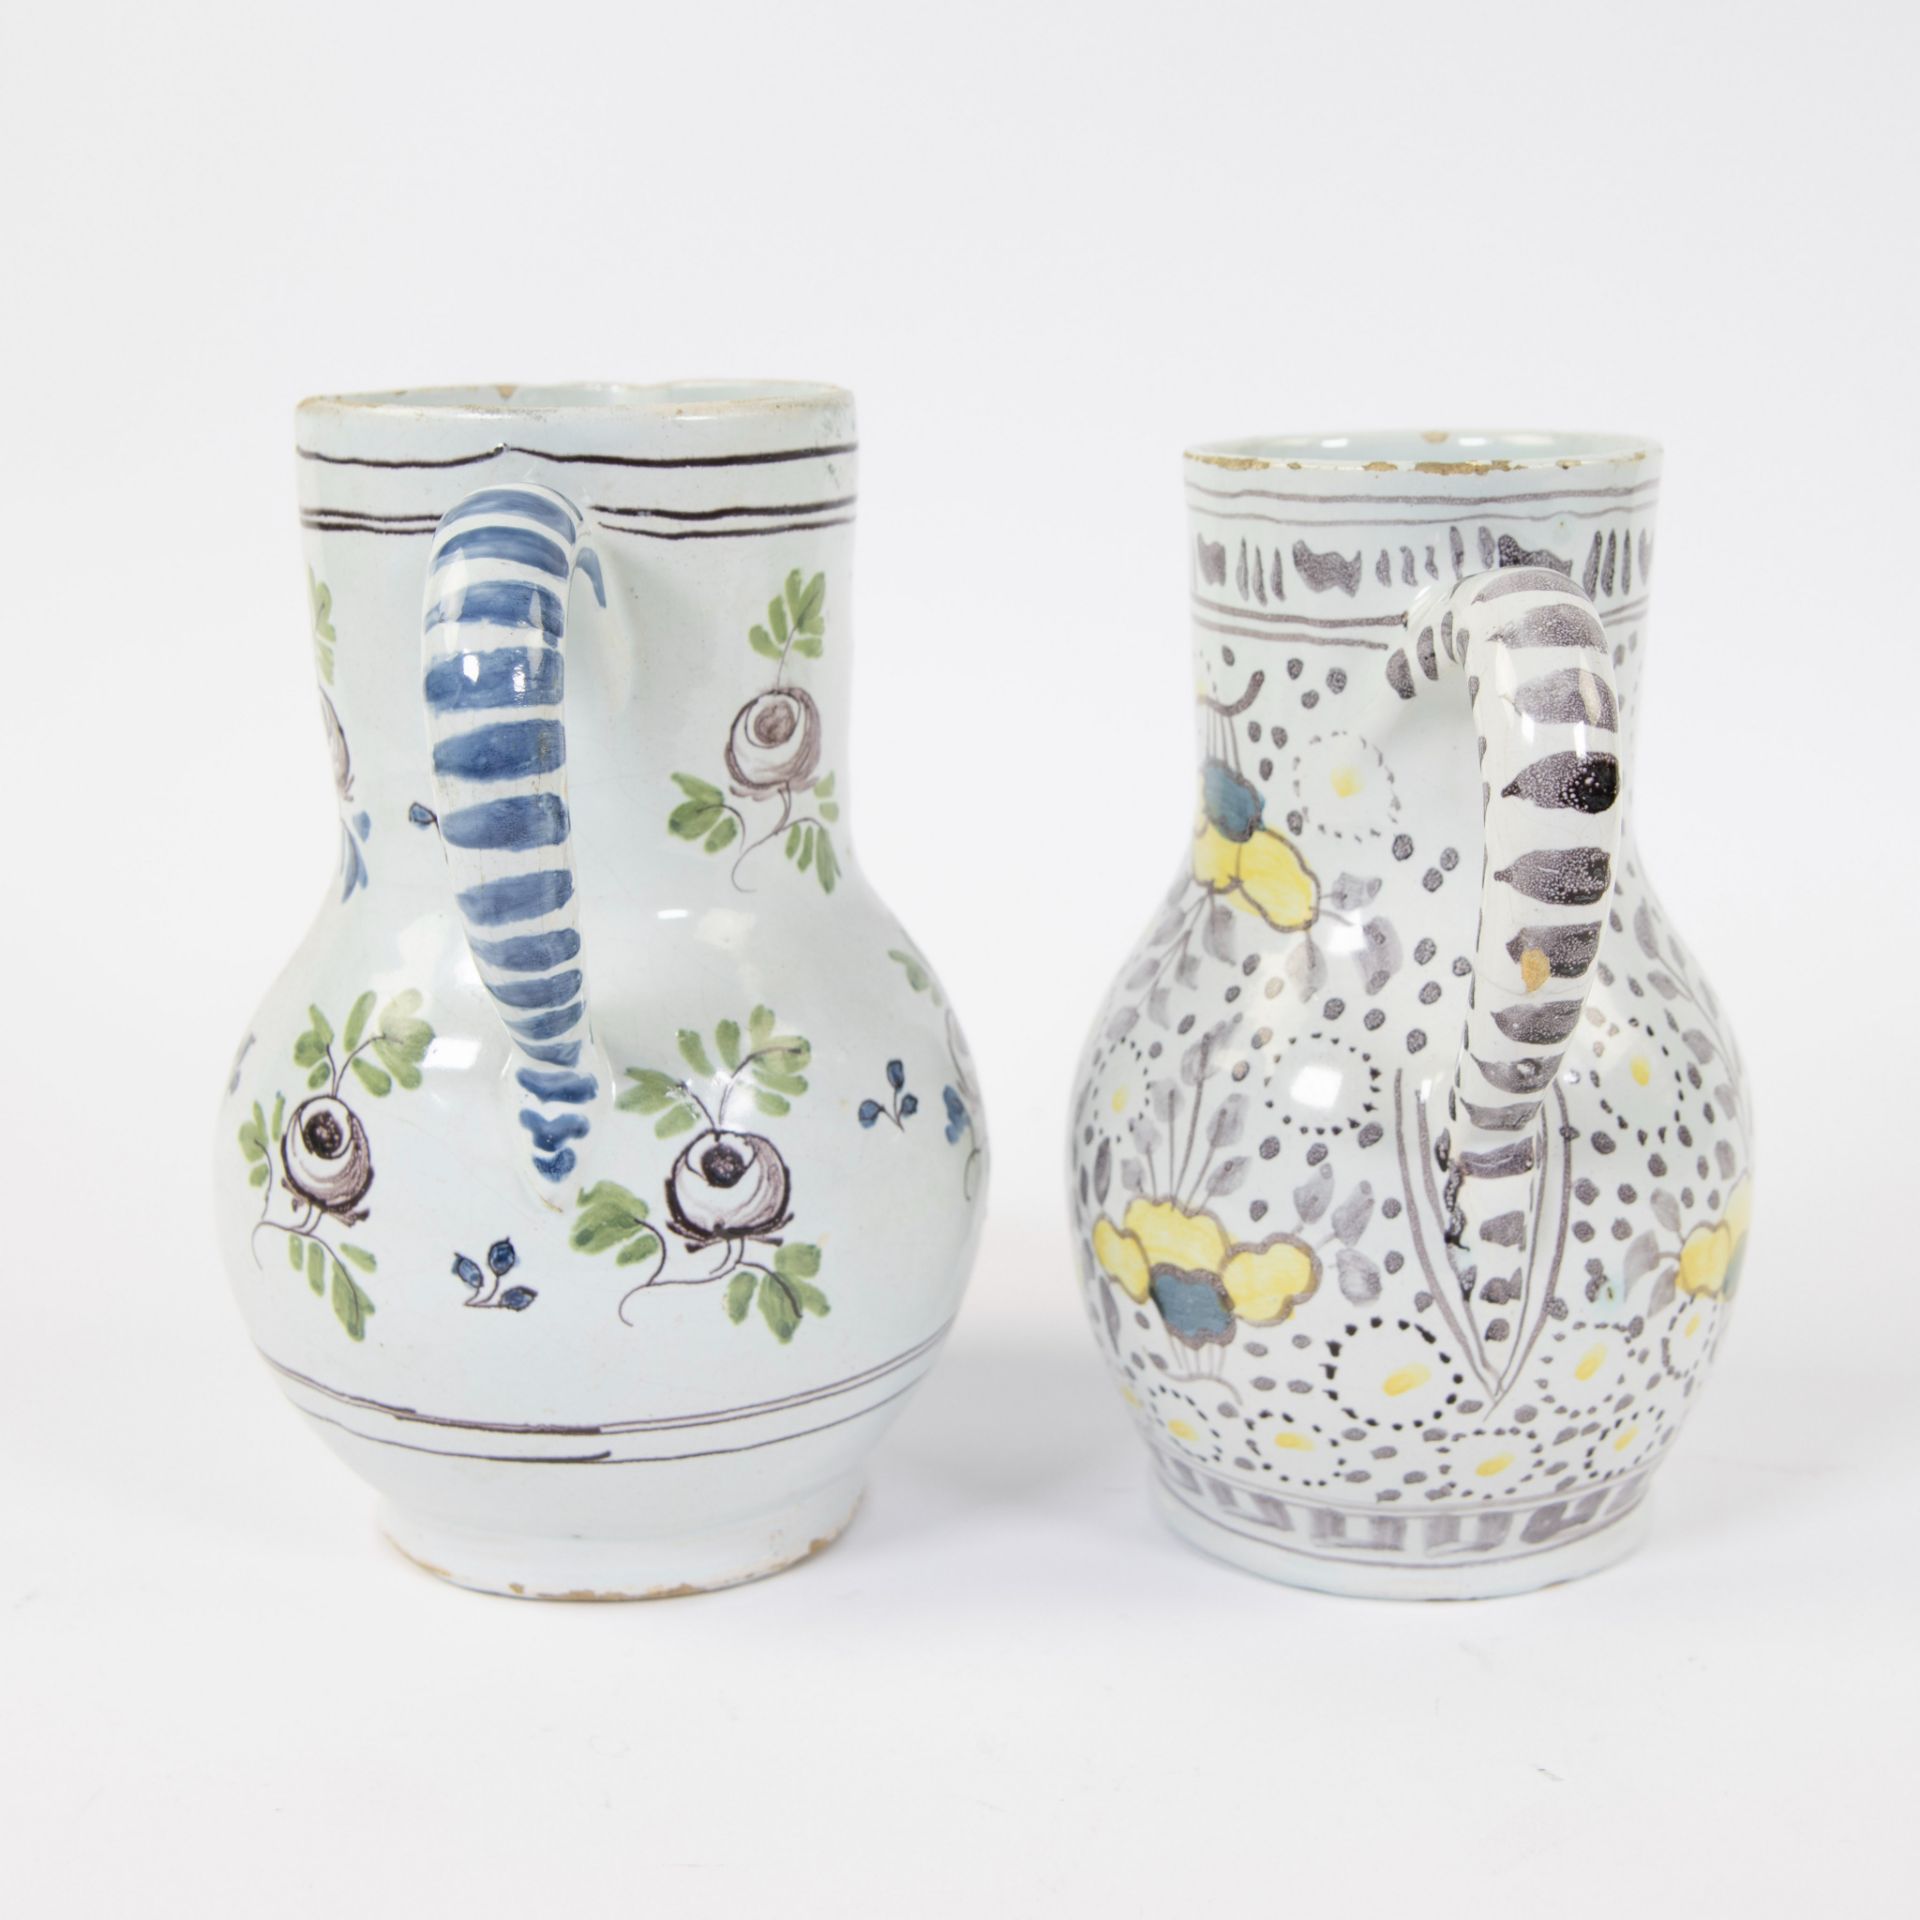 2 jugs with polychromy in faience 18th century - Image 4 of 5